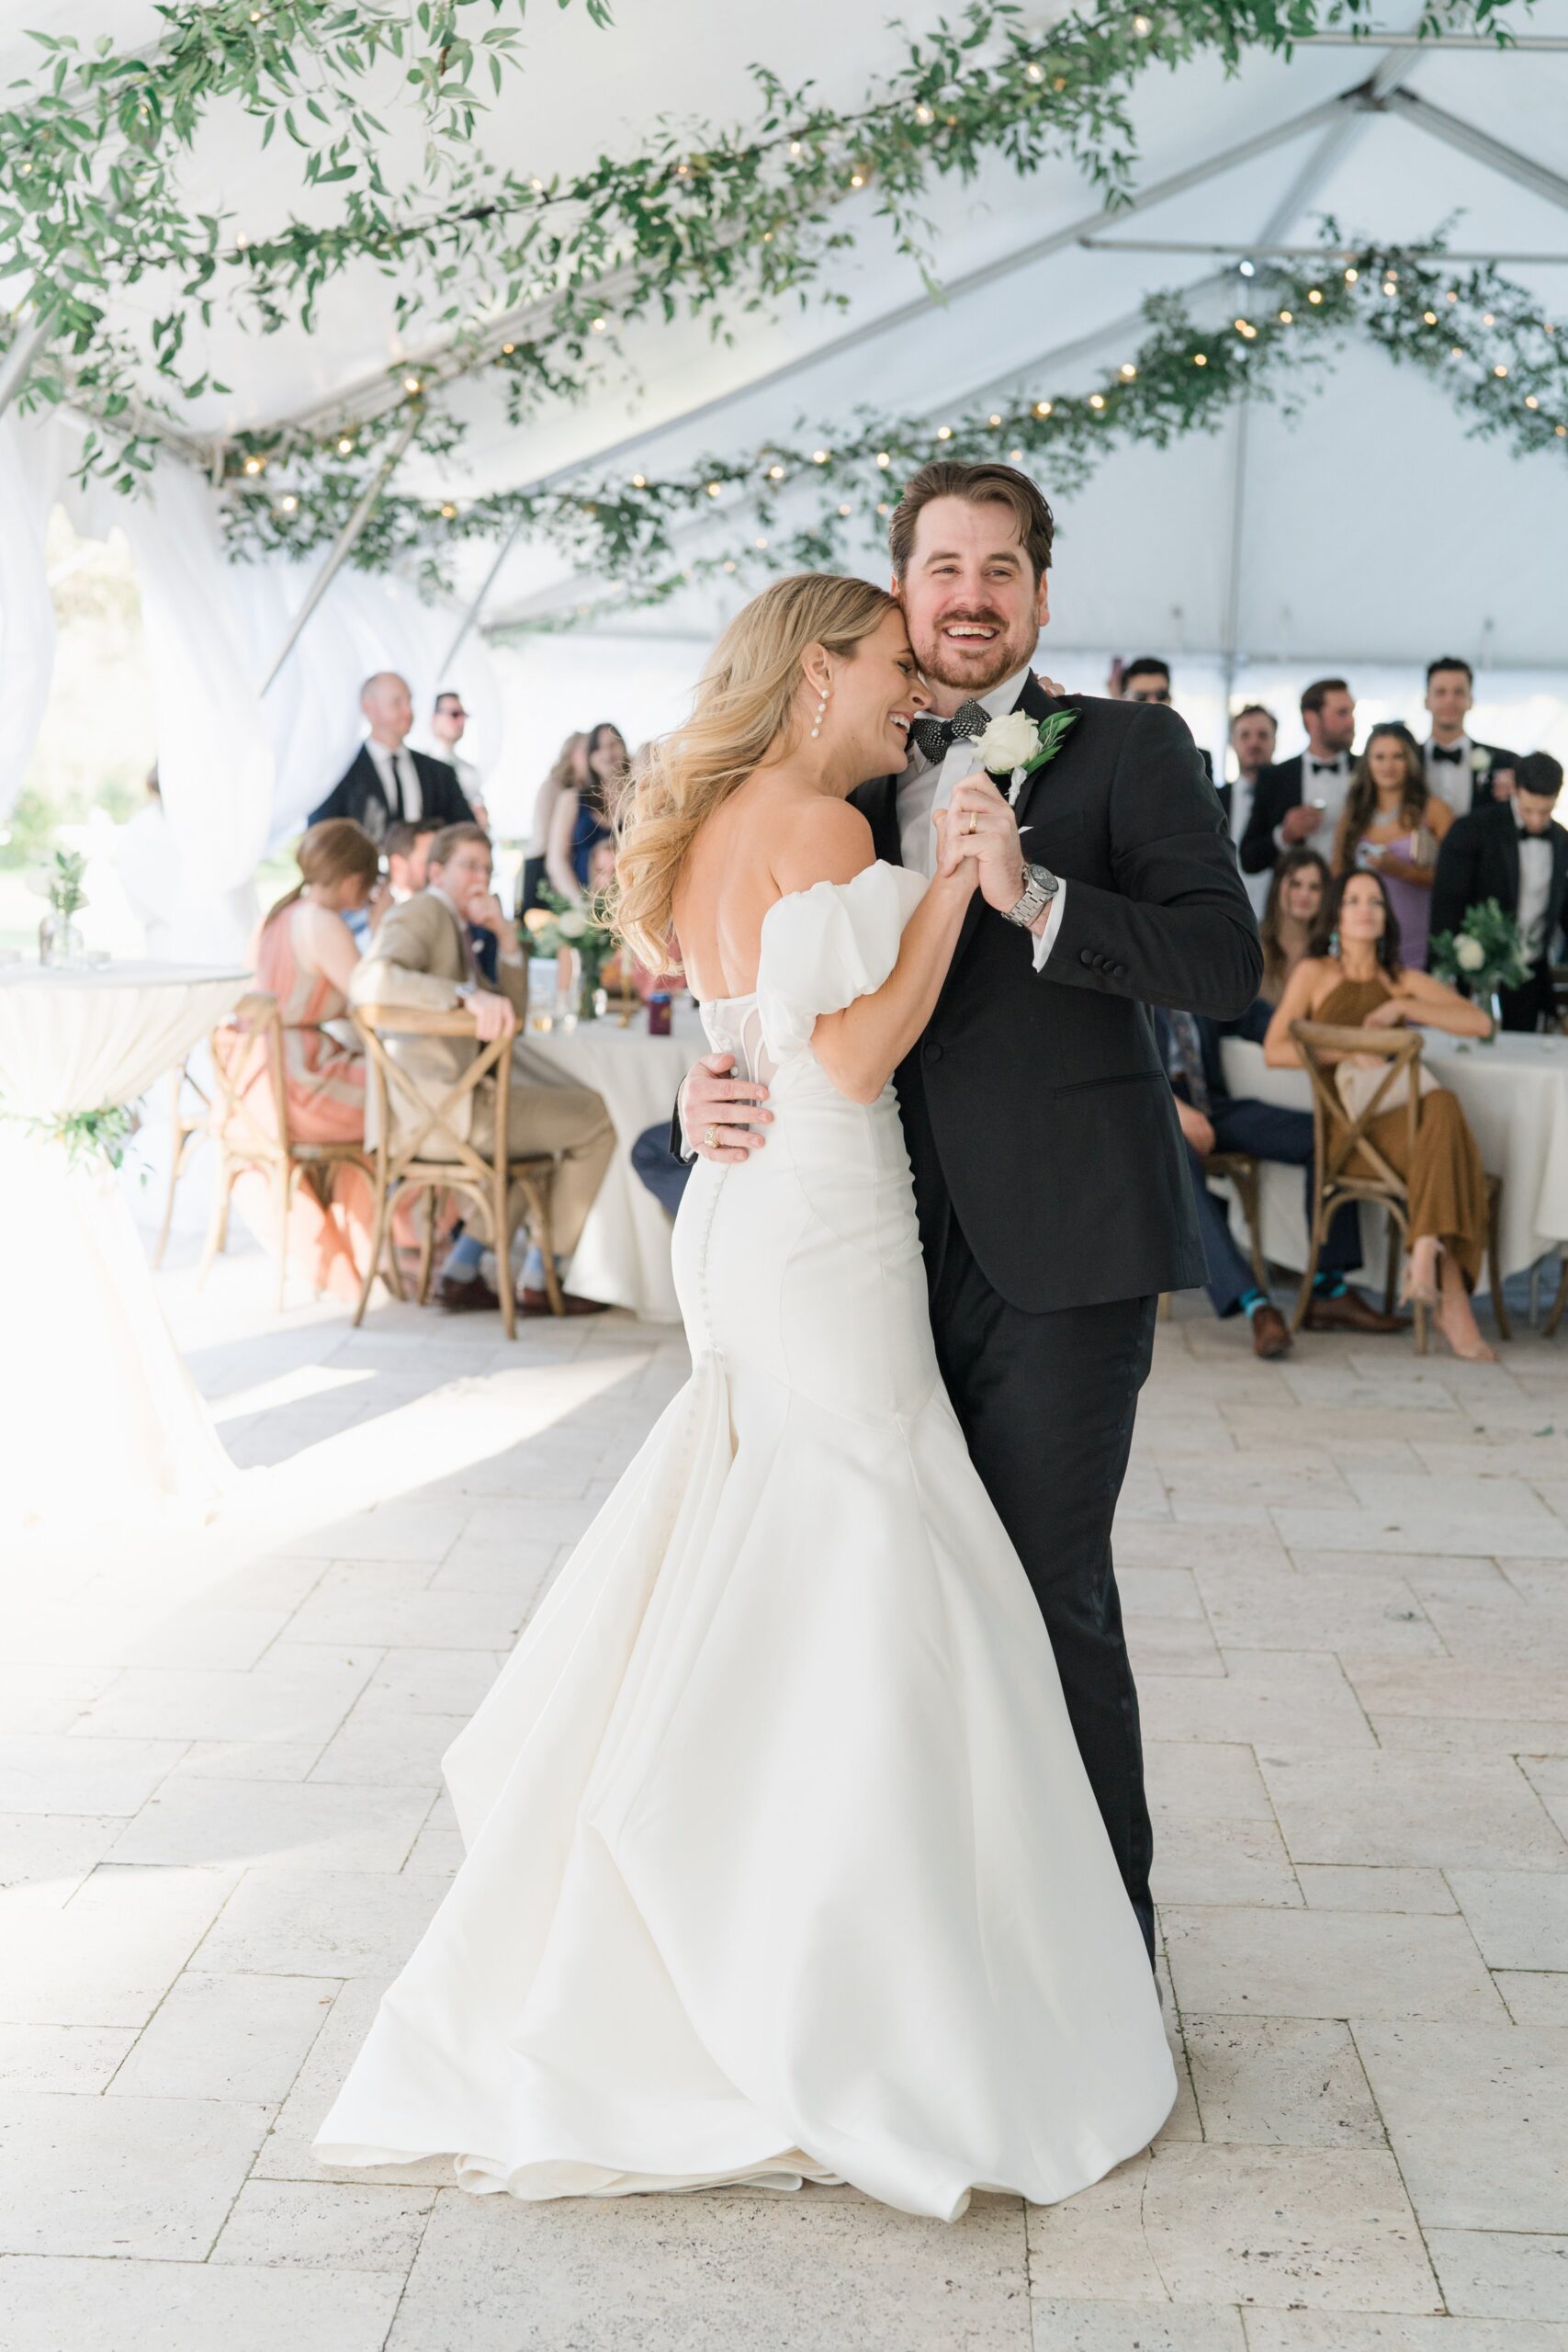 East Coast Outdoor Destination Wedding Photographer. Bride and Groom first dance. Greenery and string lights reception tent.East Coast Outdoor Destination Wedding Photographer